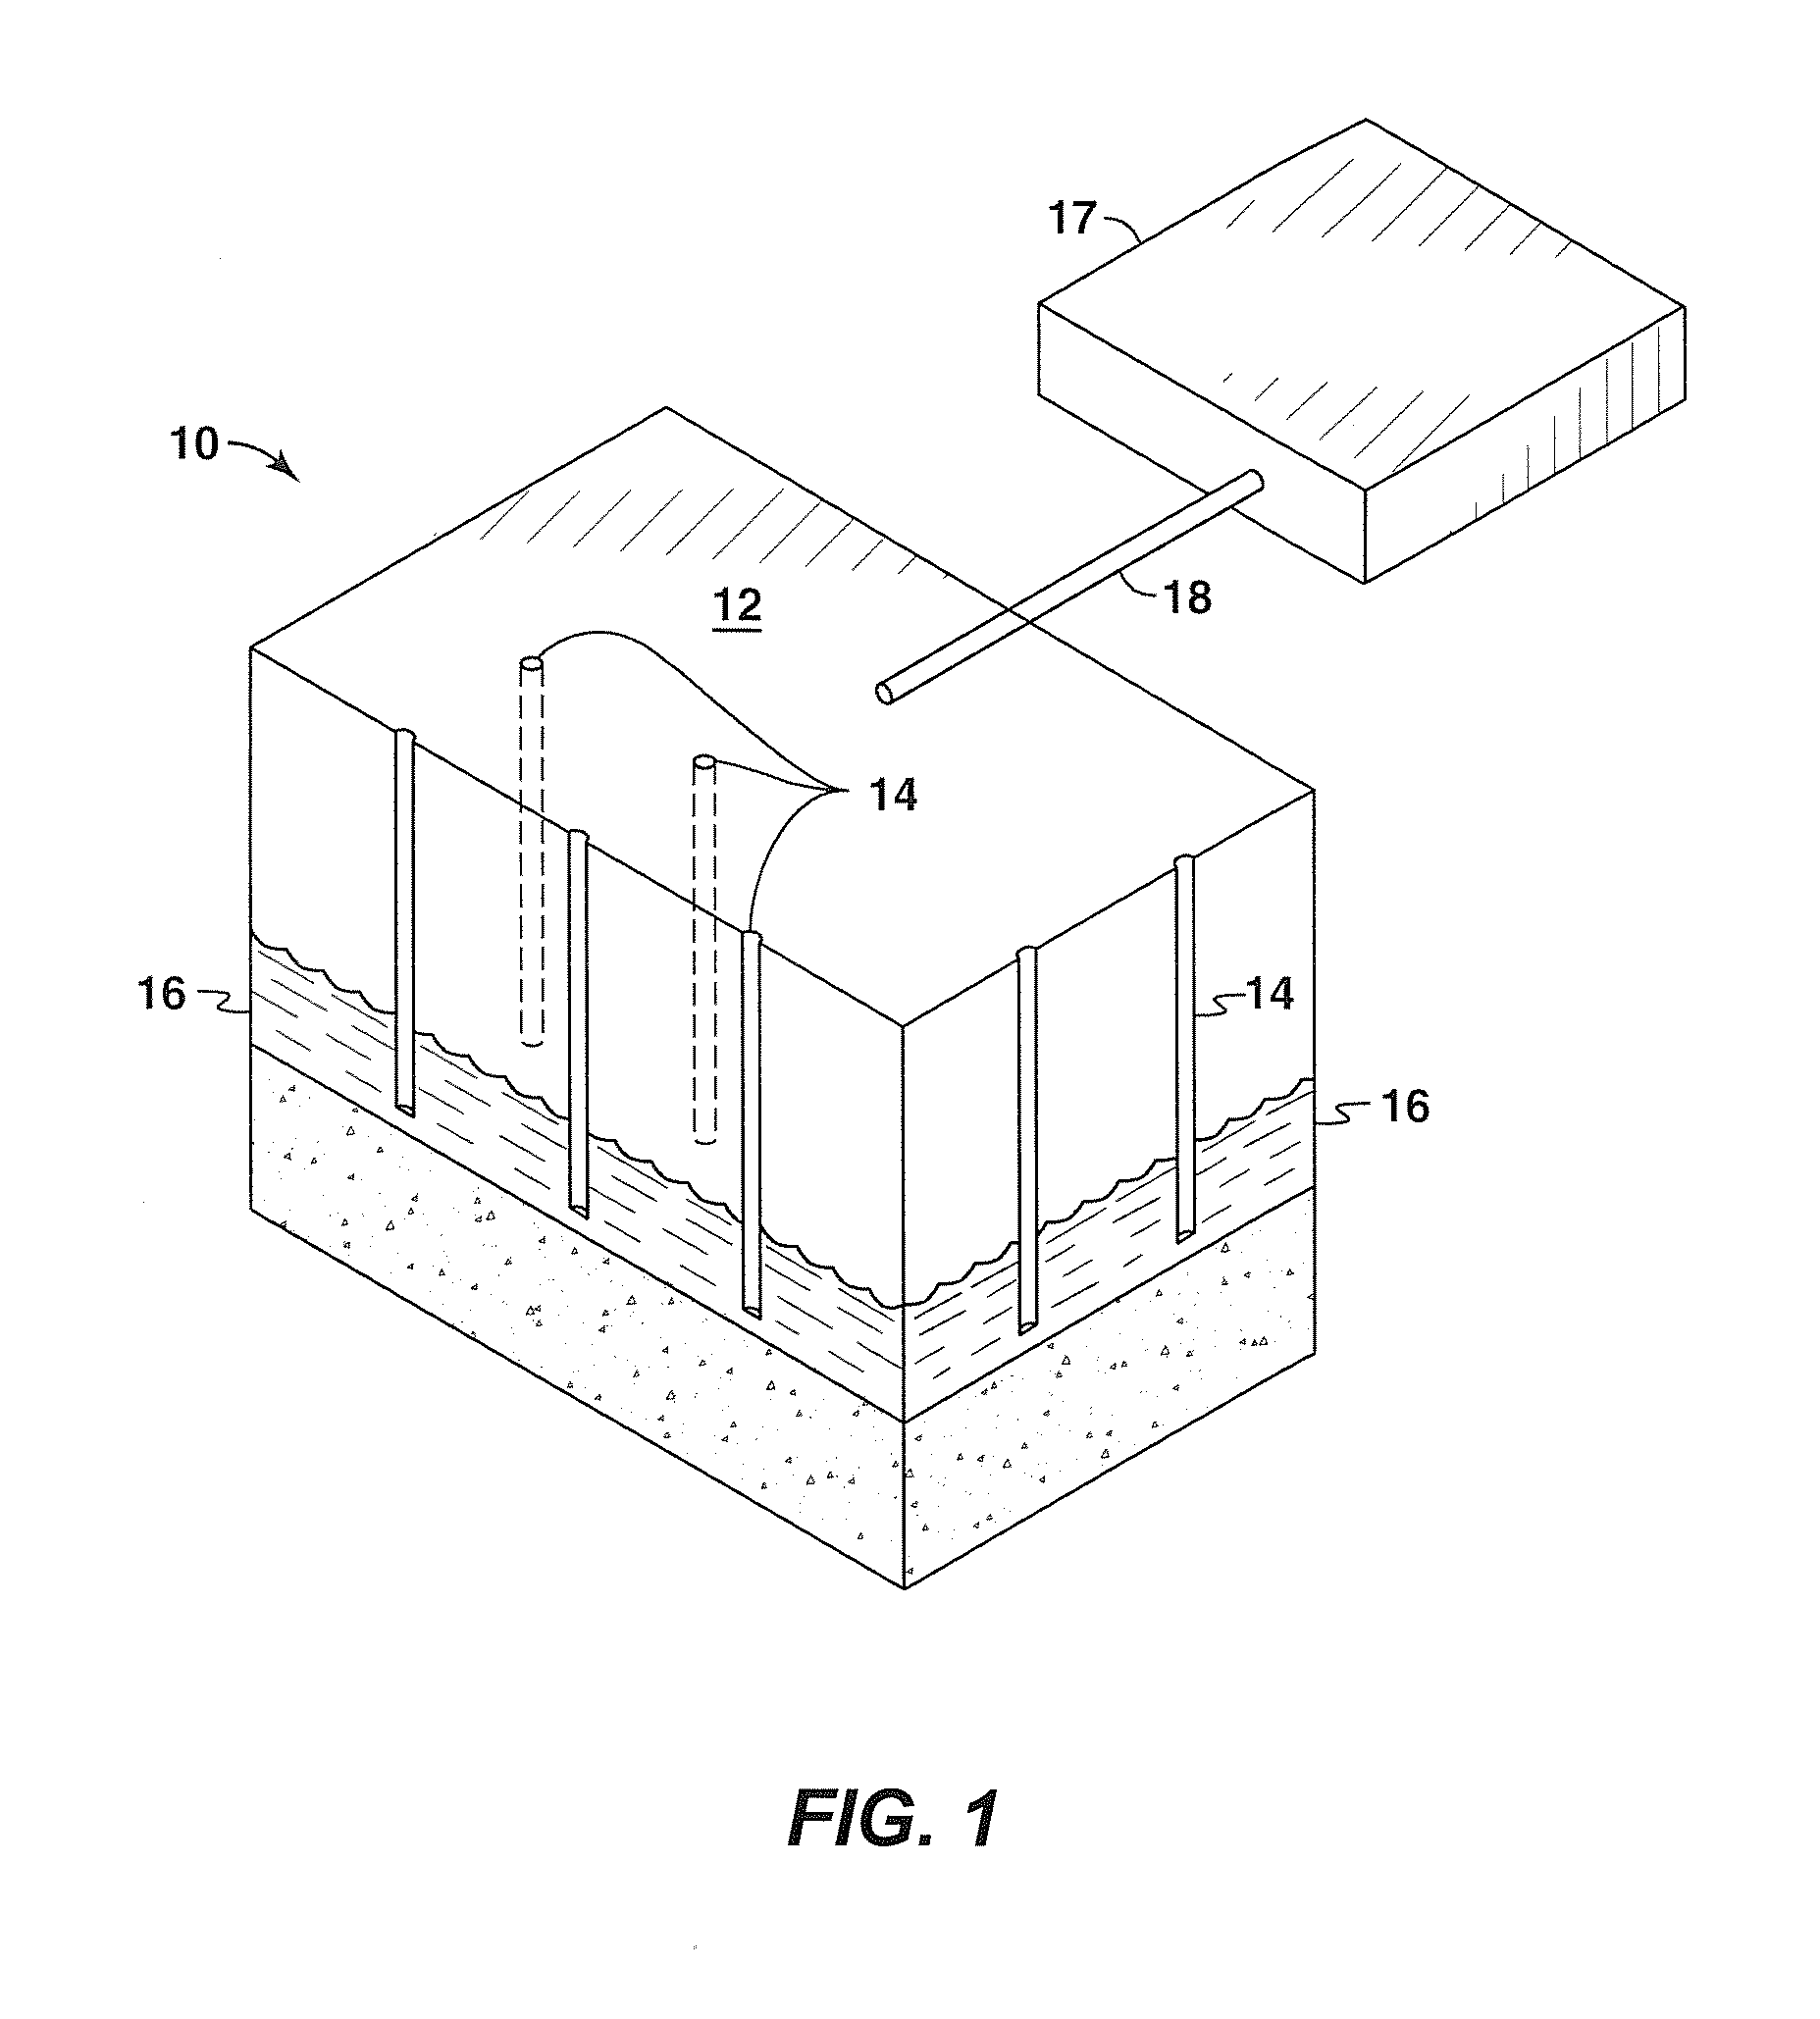 Process For Producing Hydrocarbon Fluids Combining In Situ Heating, A Power Plant And A Gas Plant